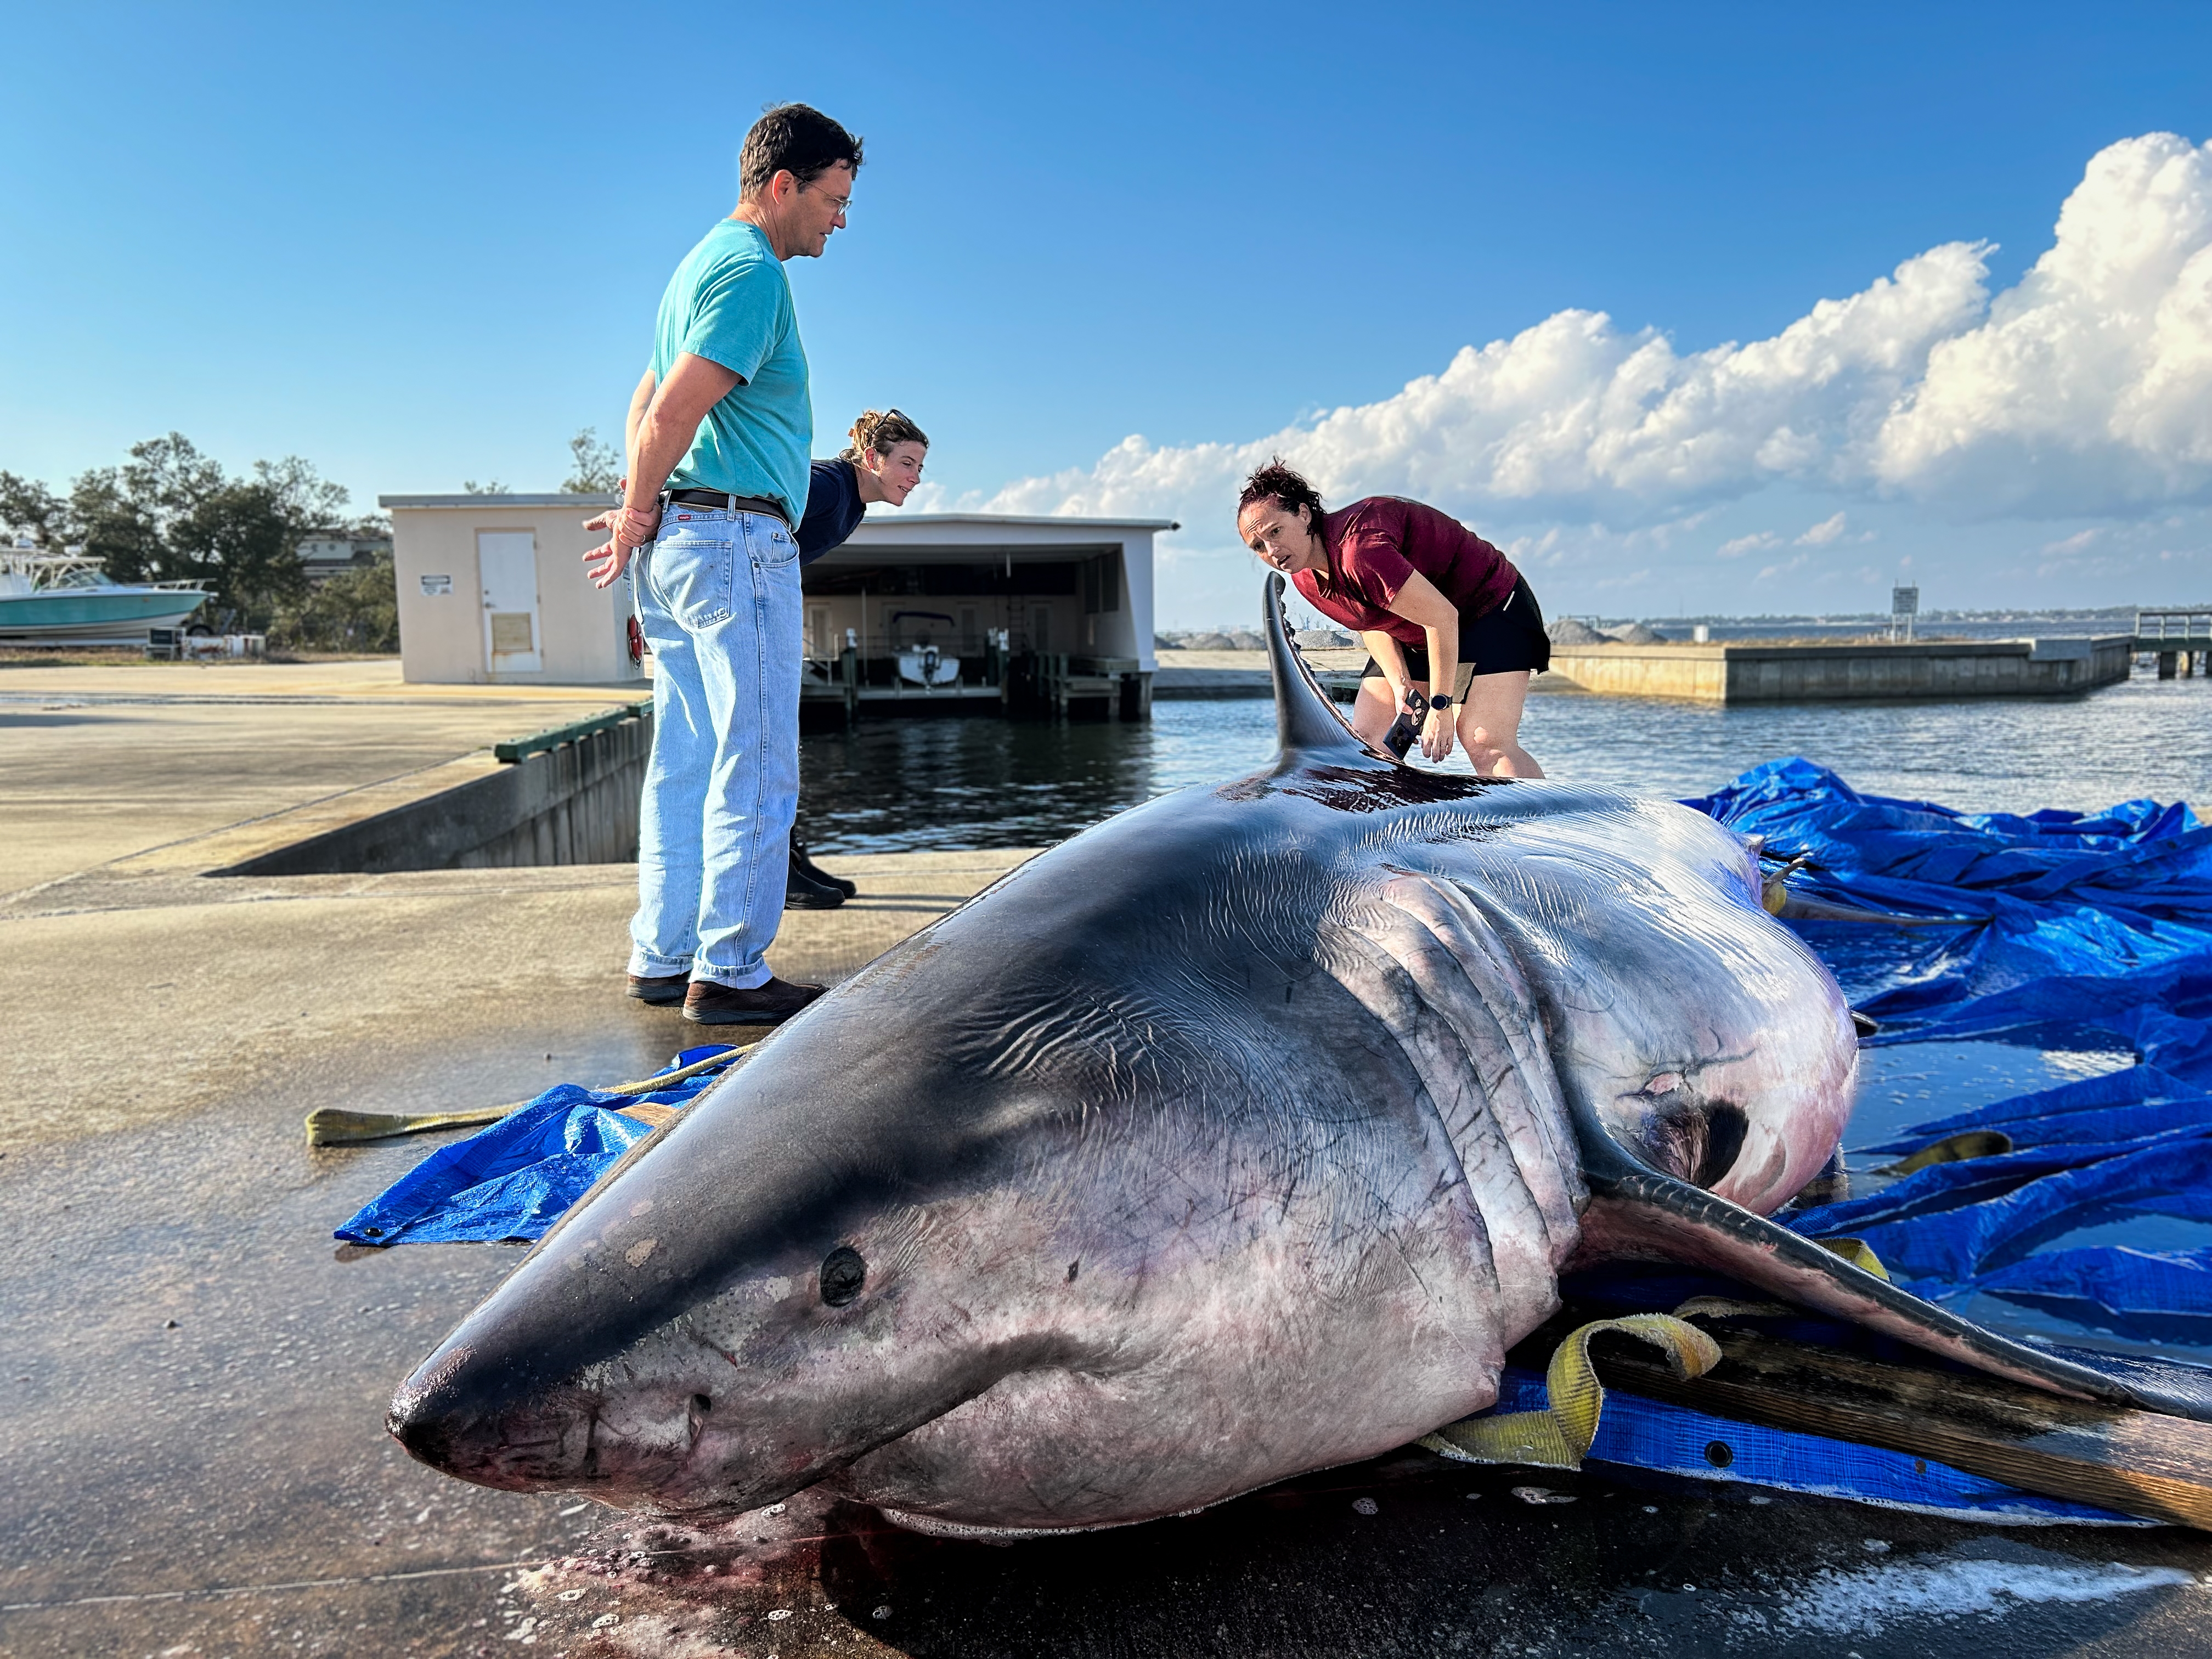 Necropsy Offers Rare Opportunity to Study White Shark Biology